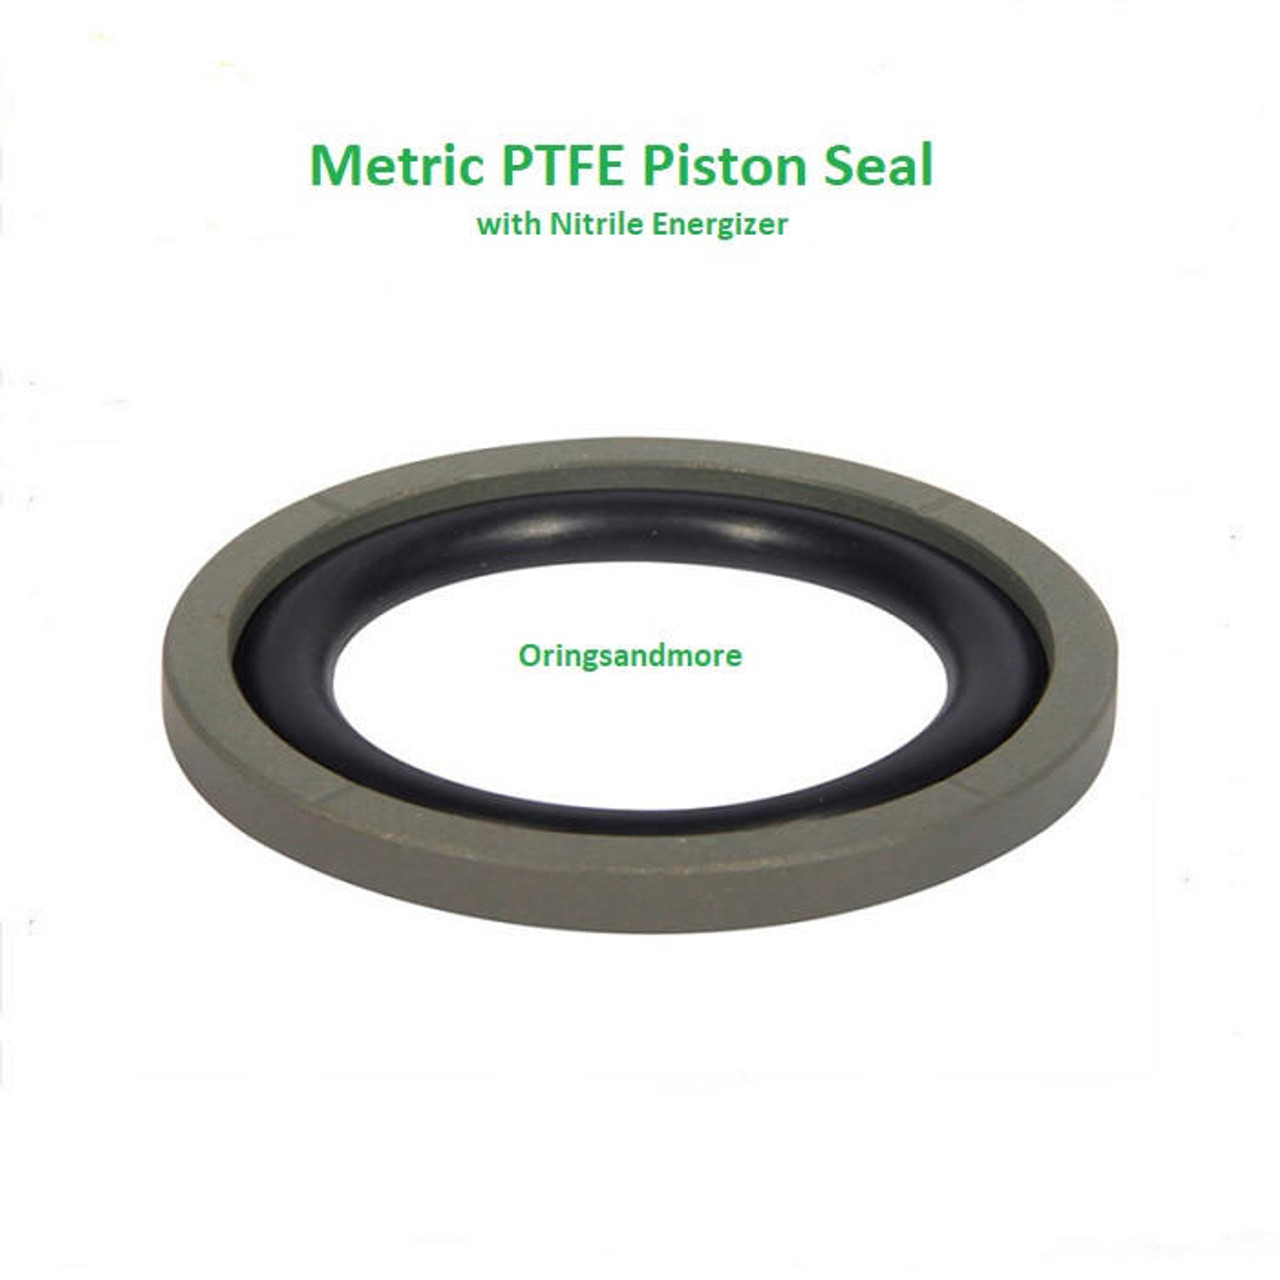 PTFE Piston Seal 15mm OD x 10mm ID x 2.2mm   Price for 1 pc